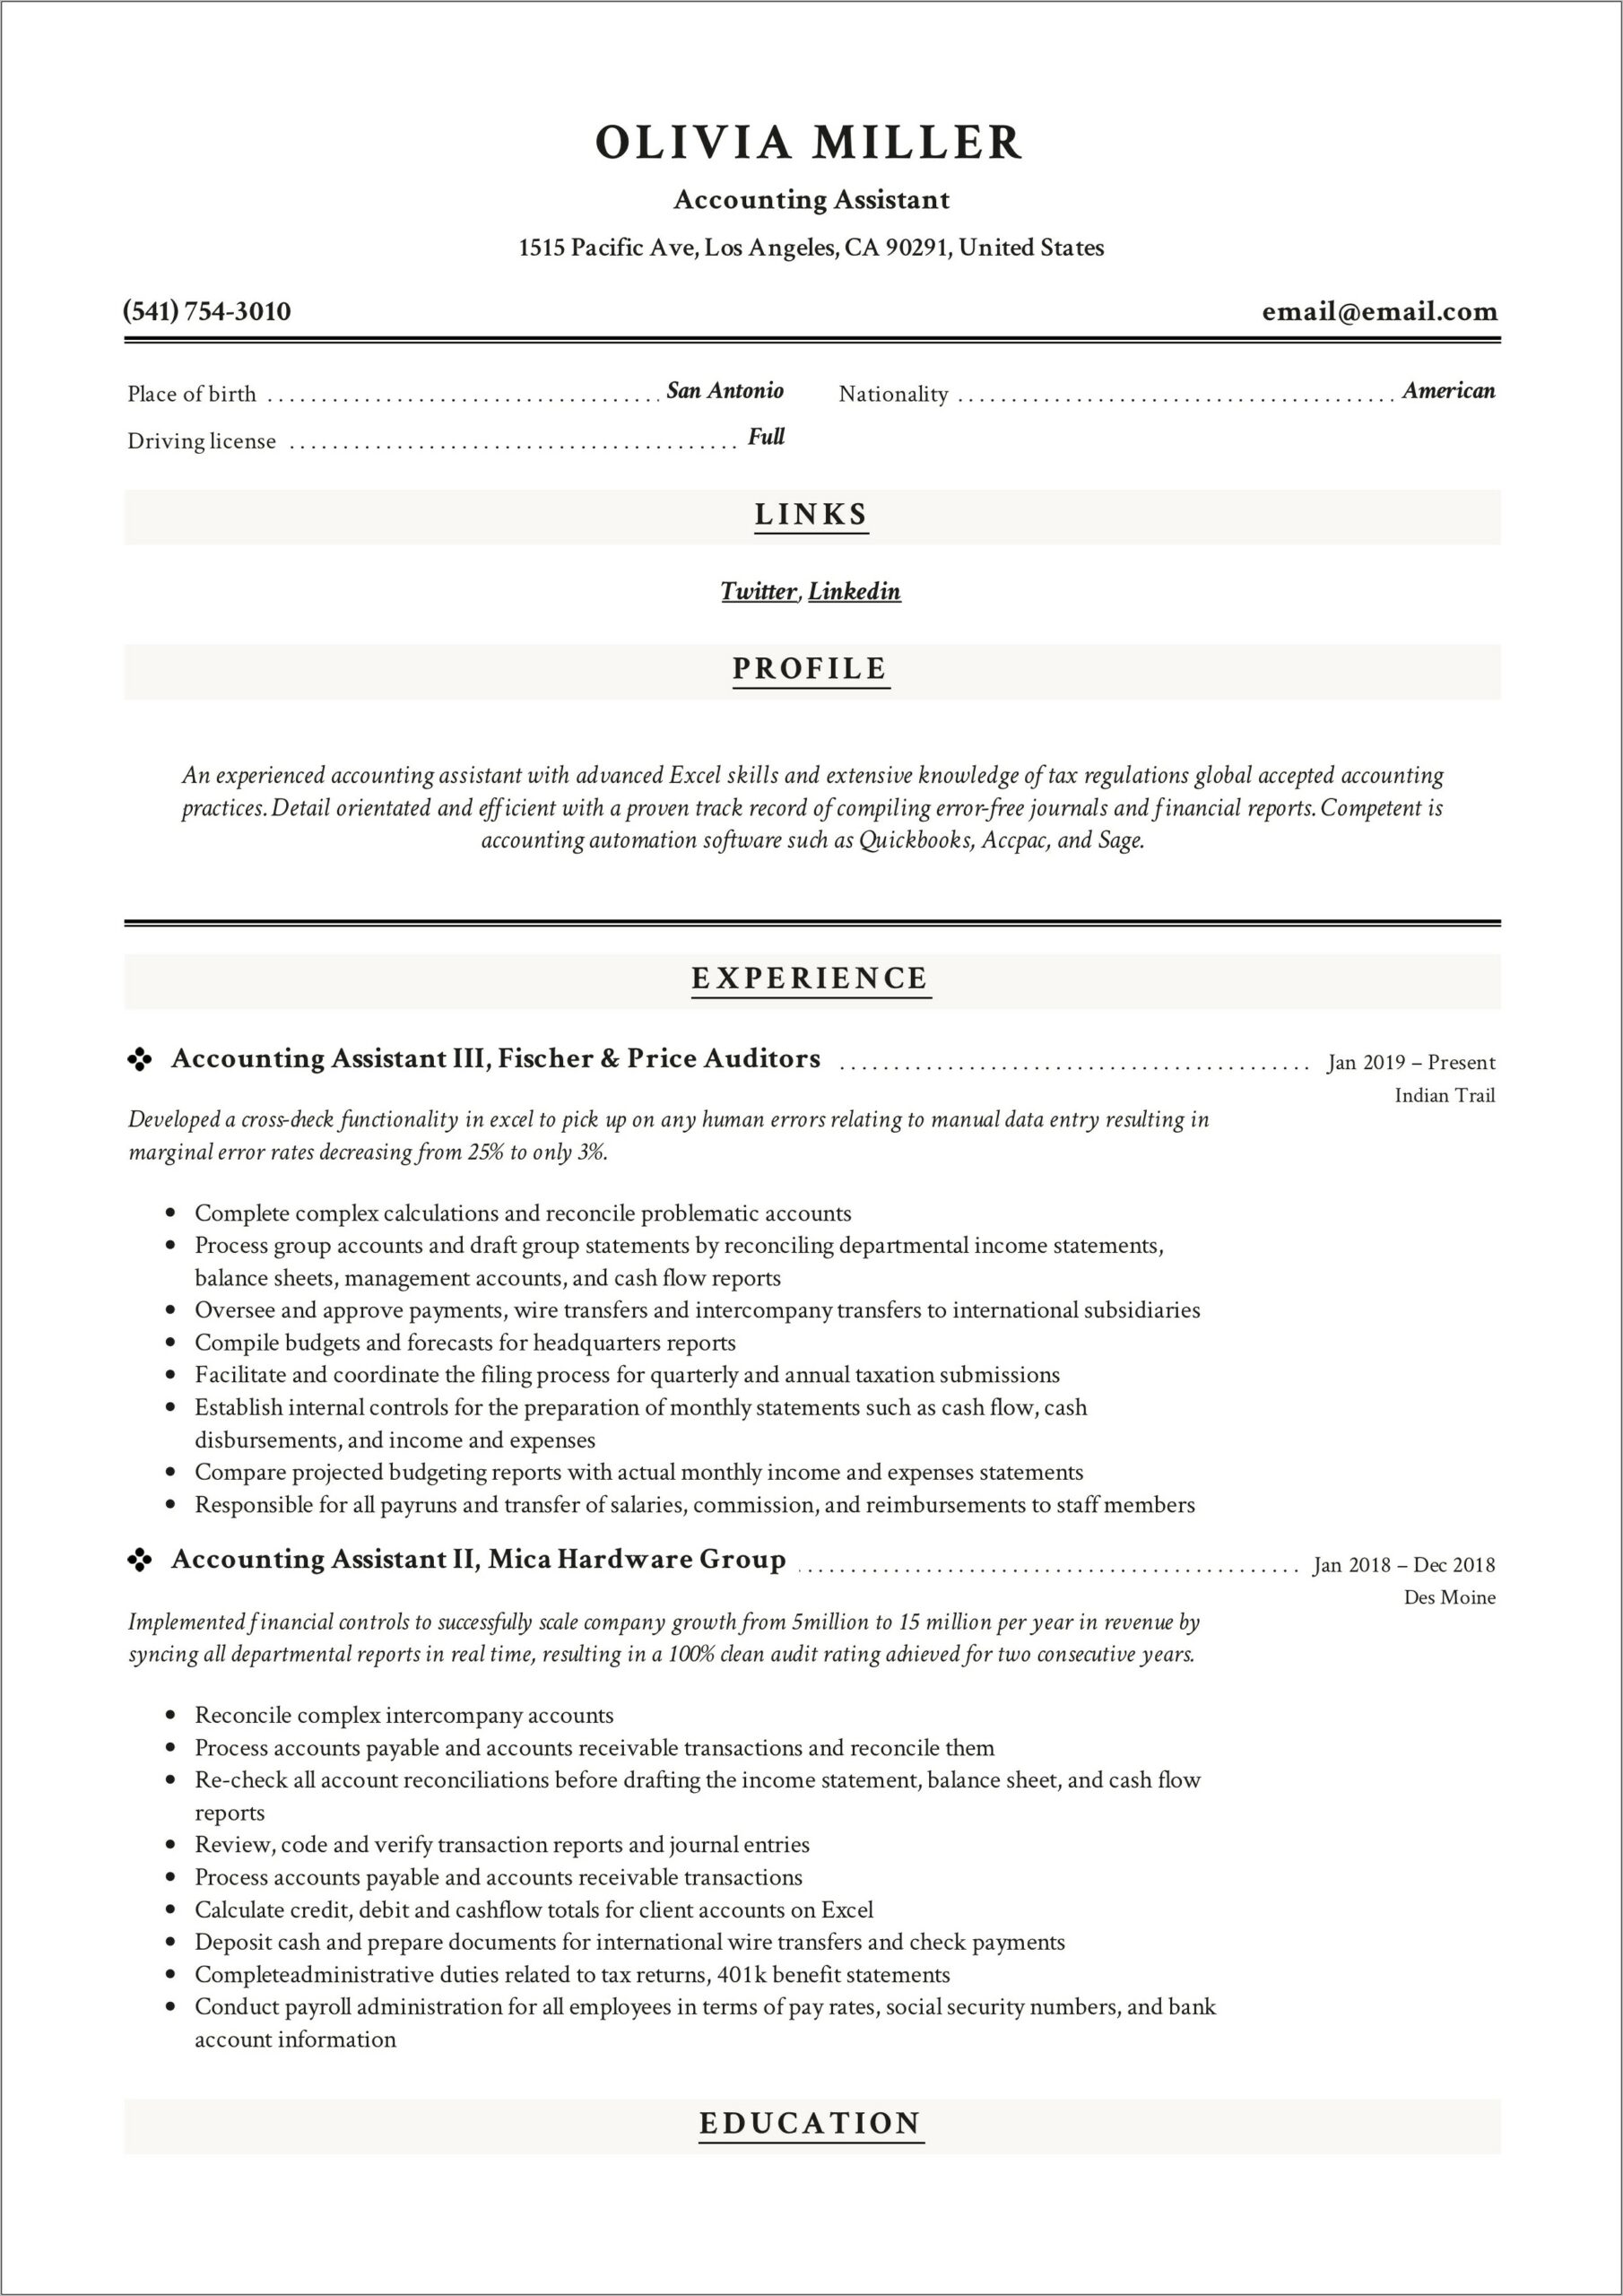 Resume Summary Statement Examples For Accounting